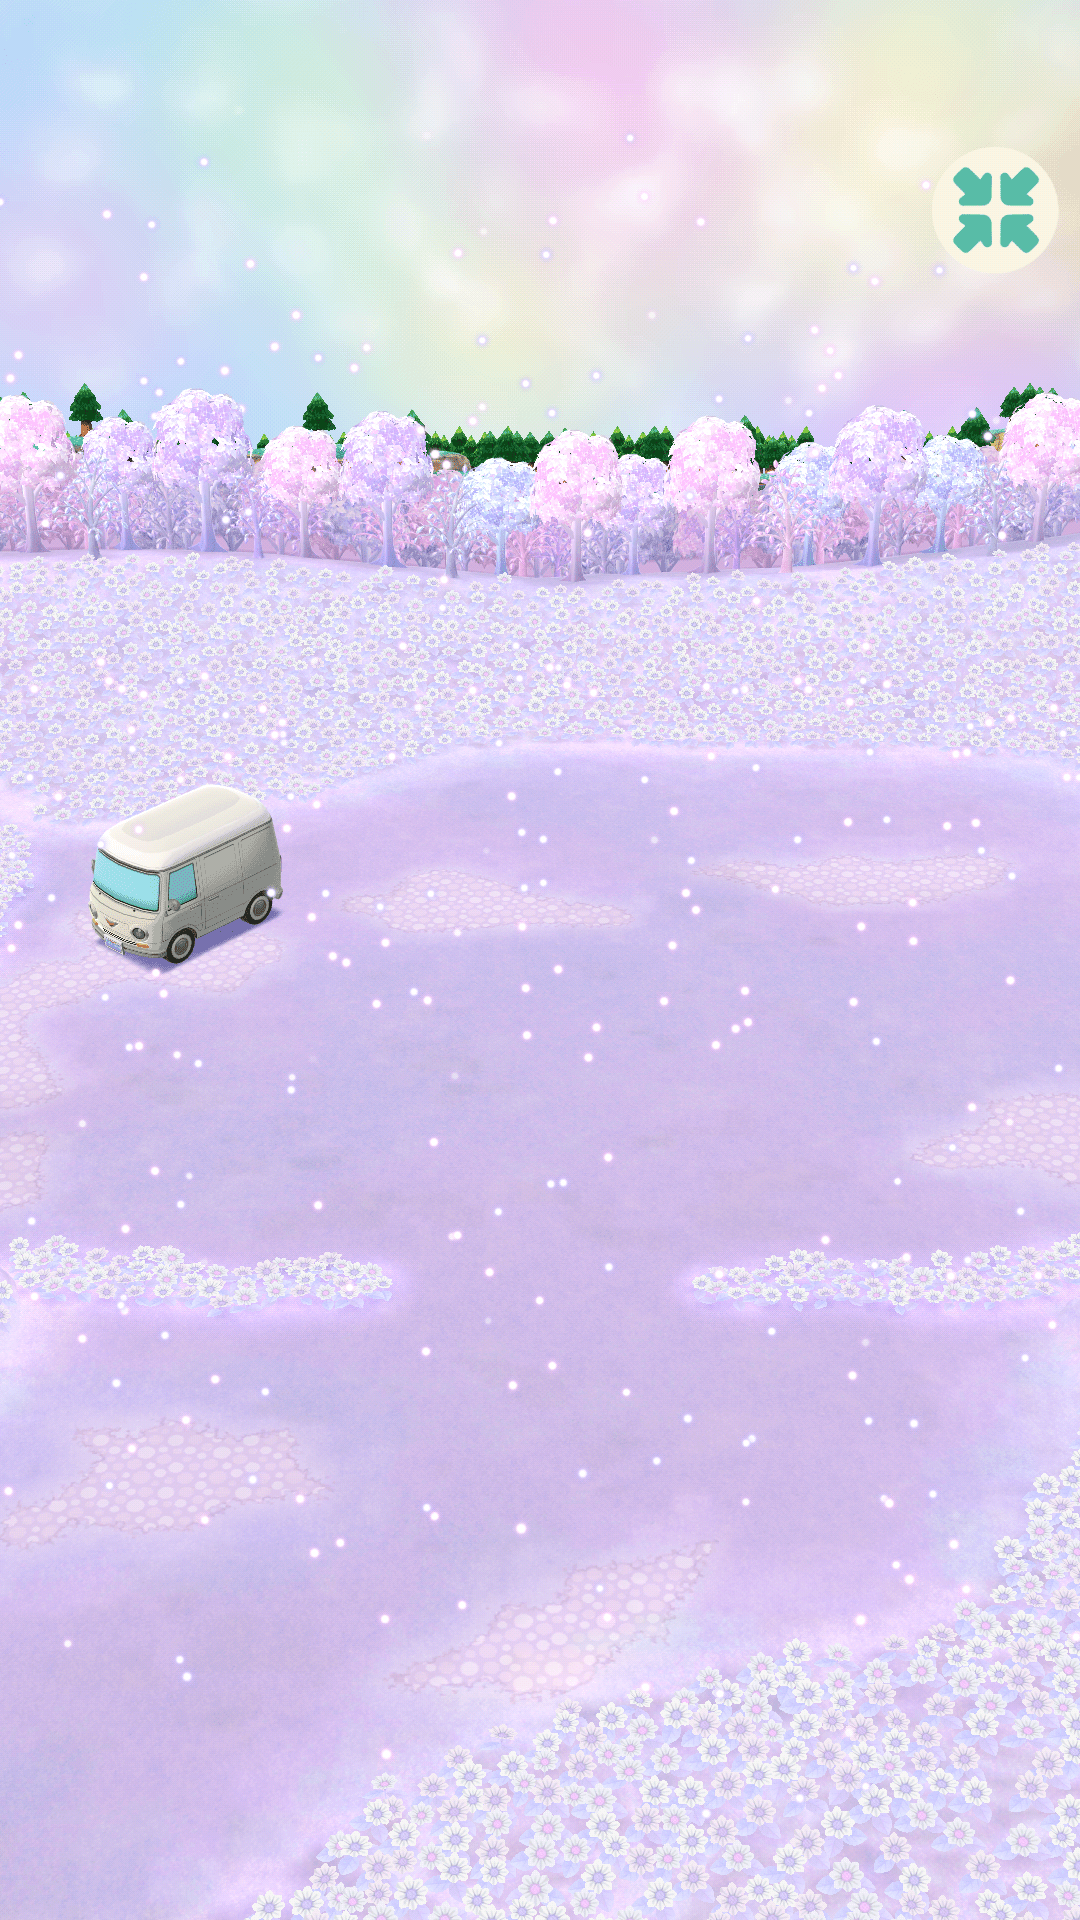 A van is driving through a snowy landscape with a forest of cherry trees in the background. - Animal Crossing